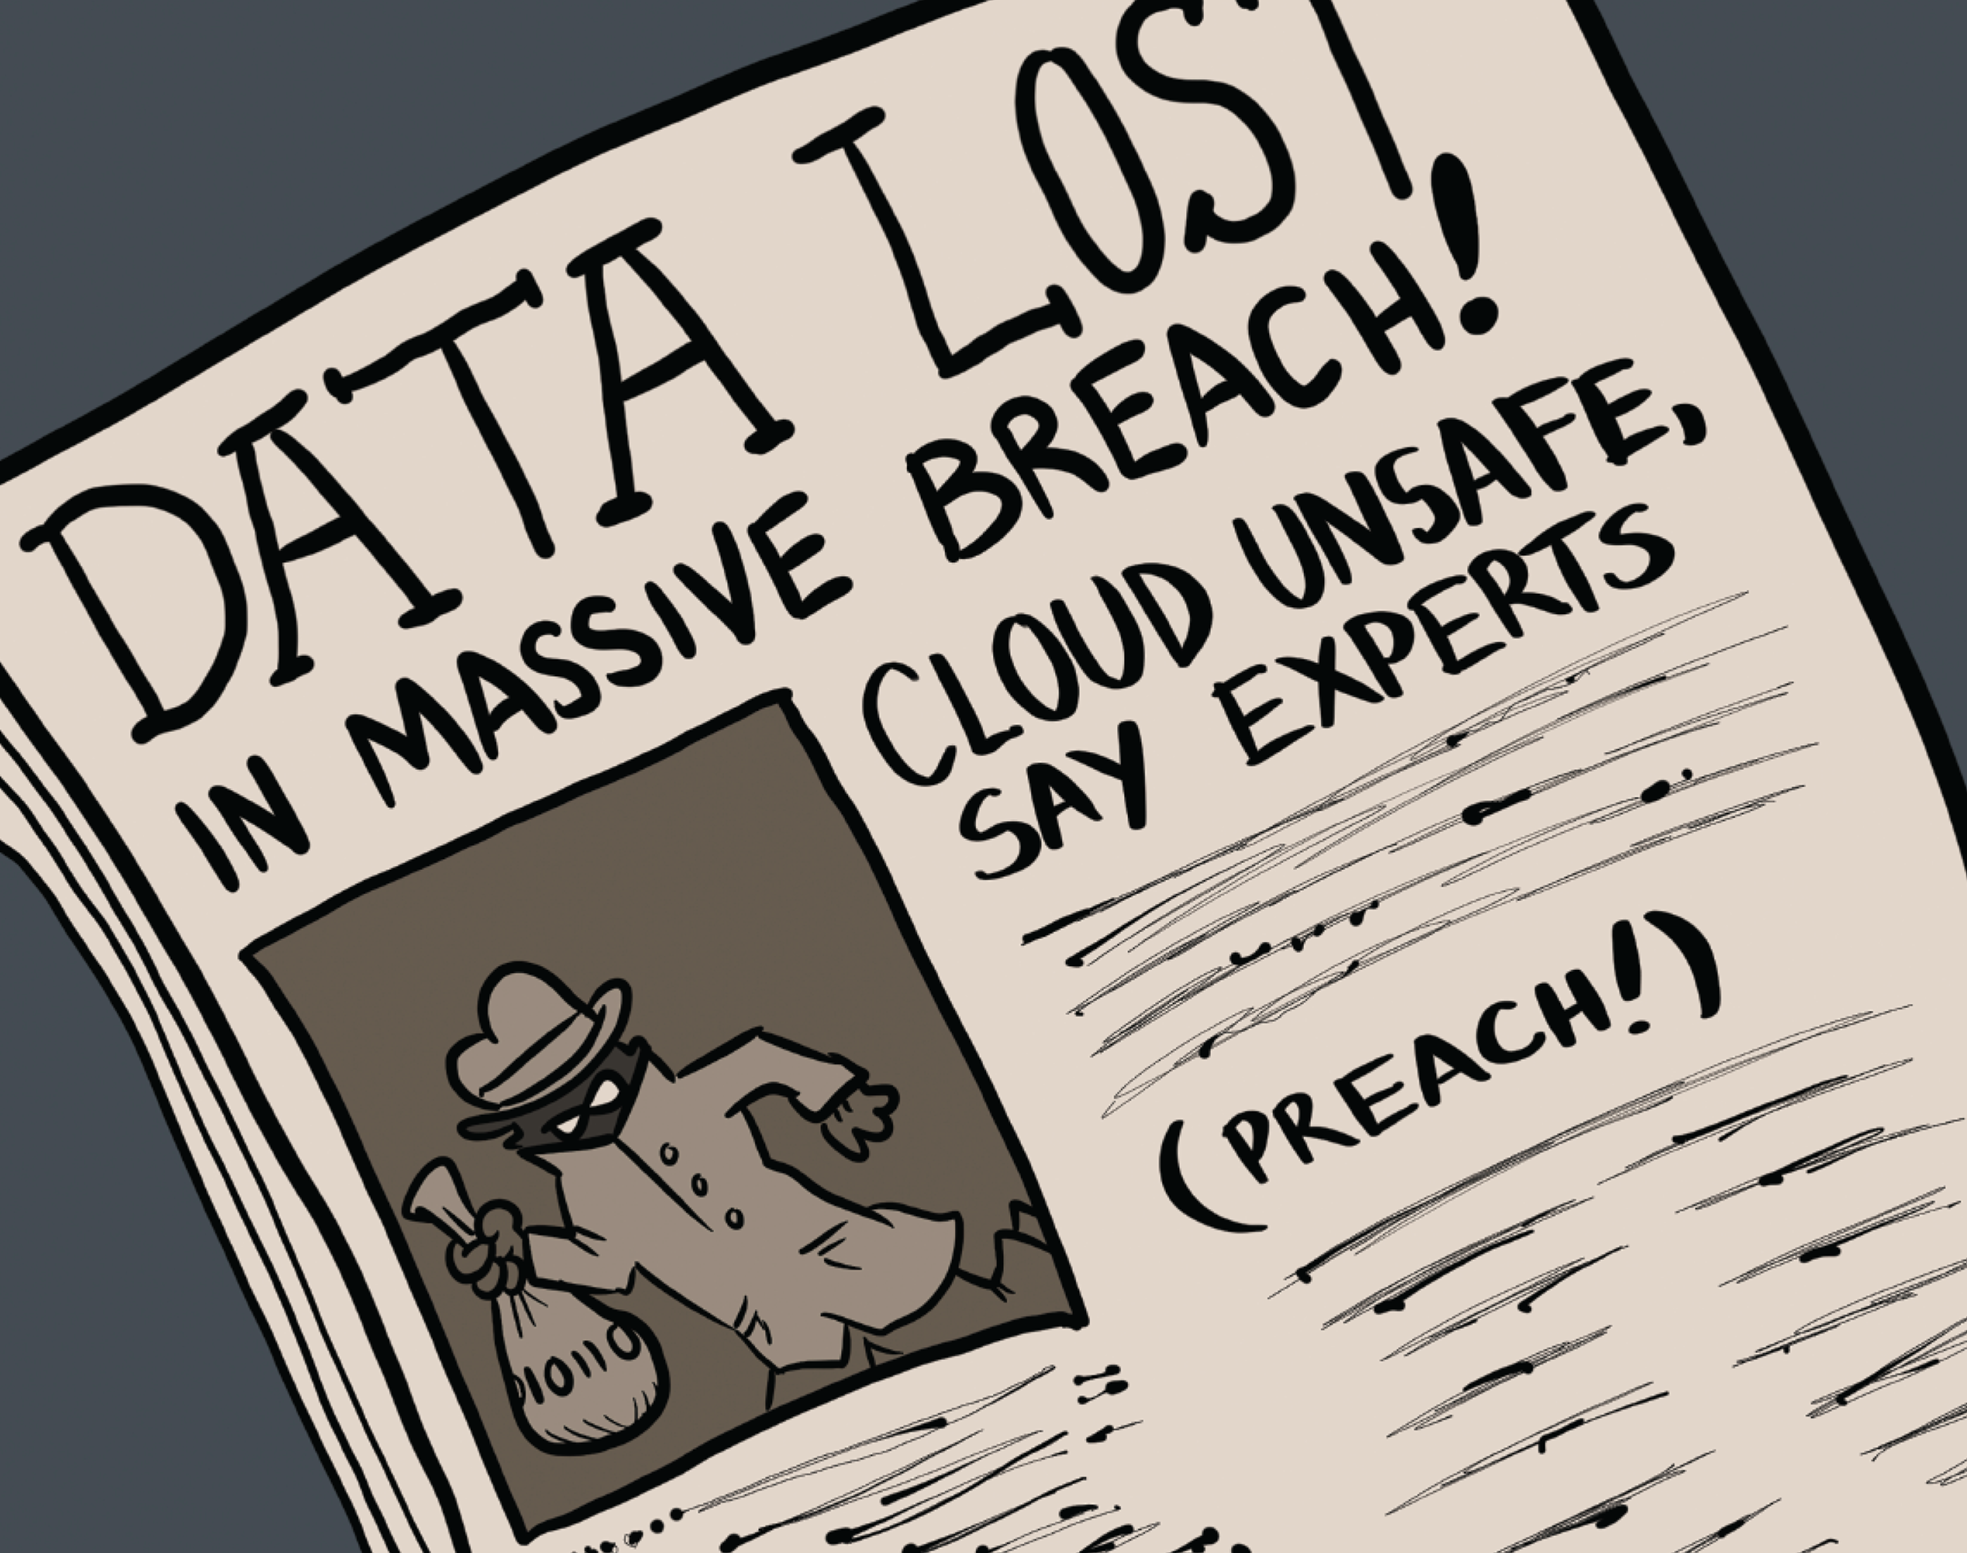 Cartoon illustration of a newspaper displaying the news about data loss in massive breach.